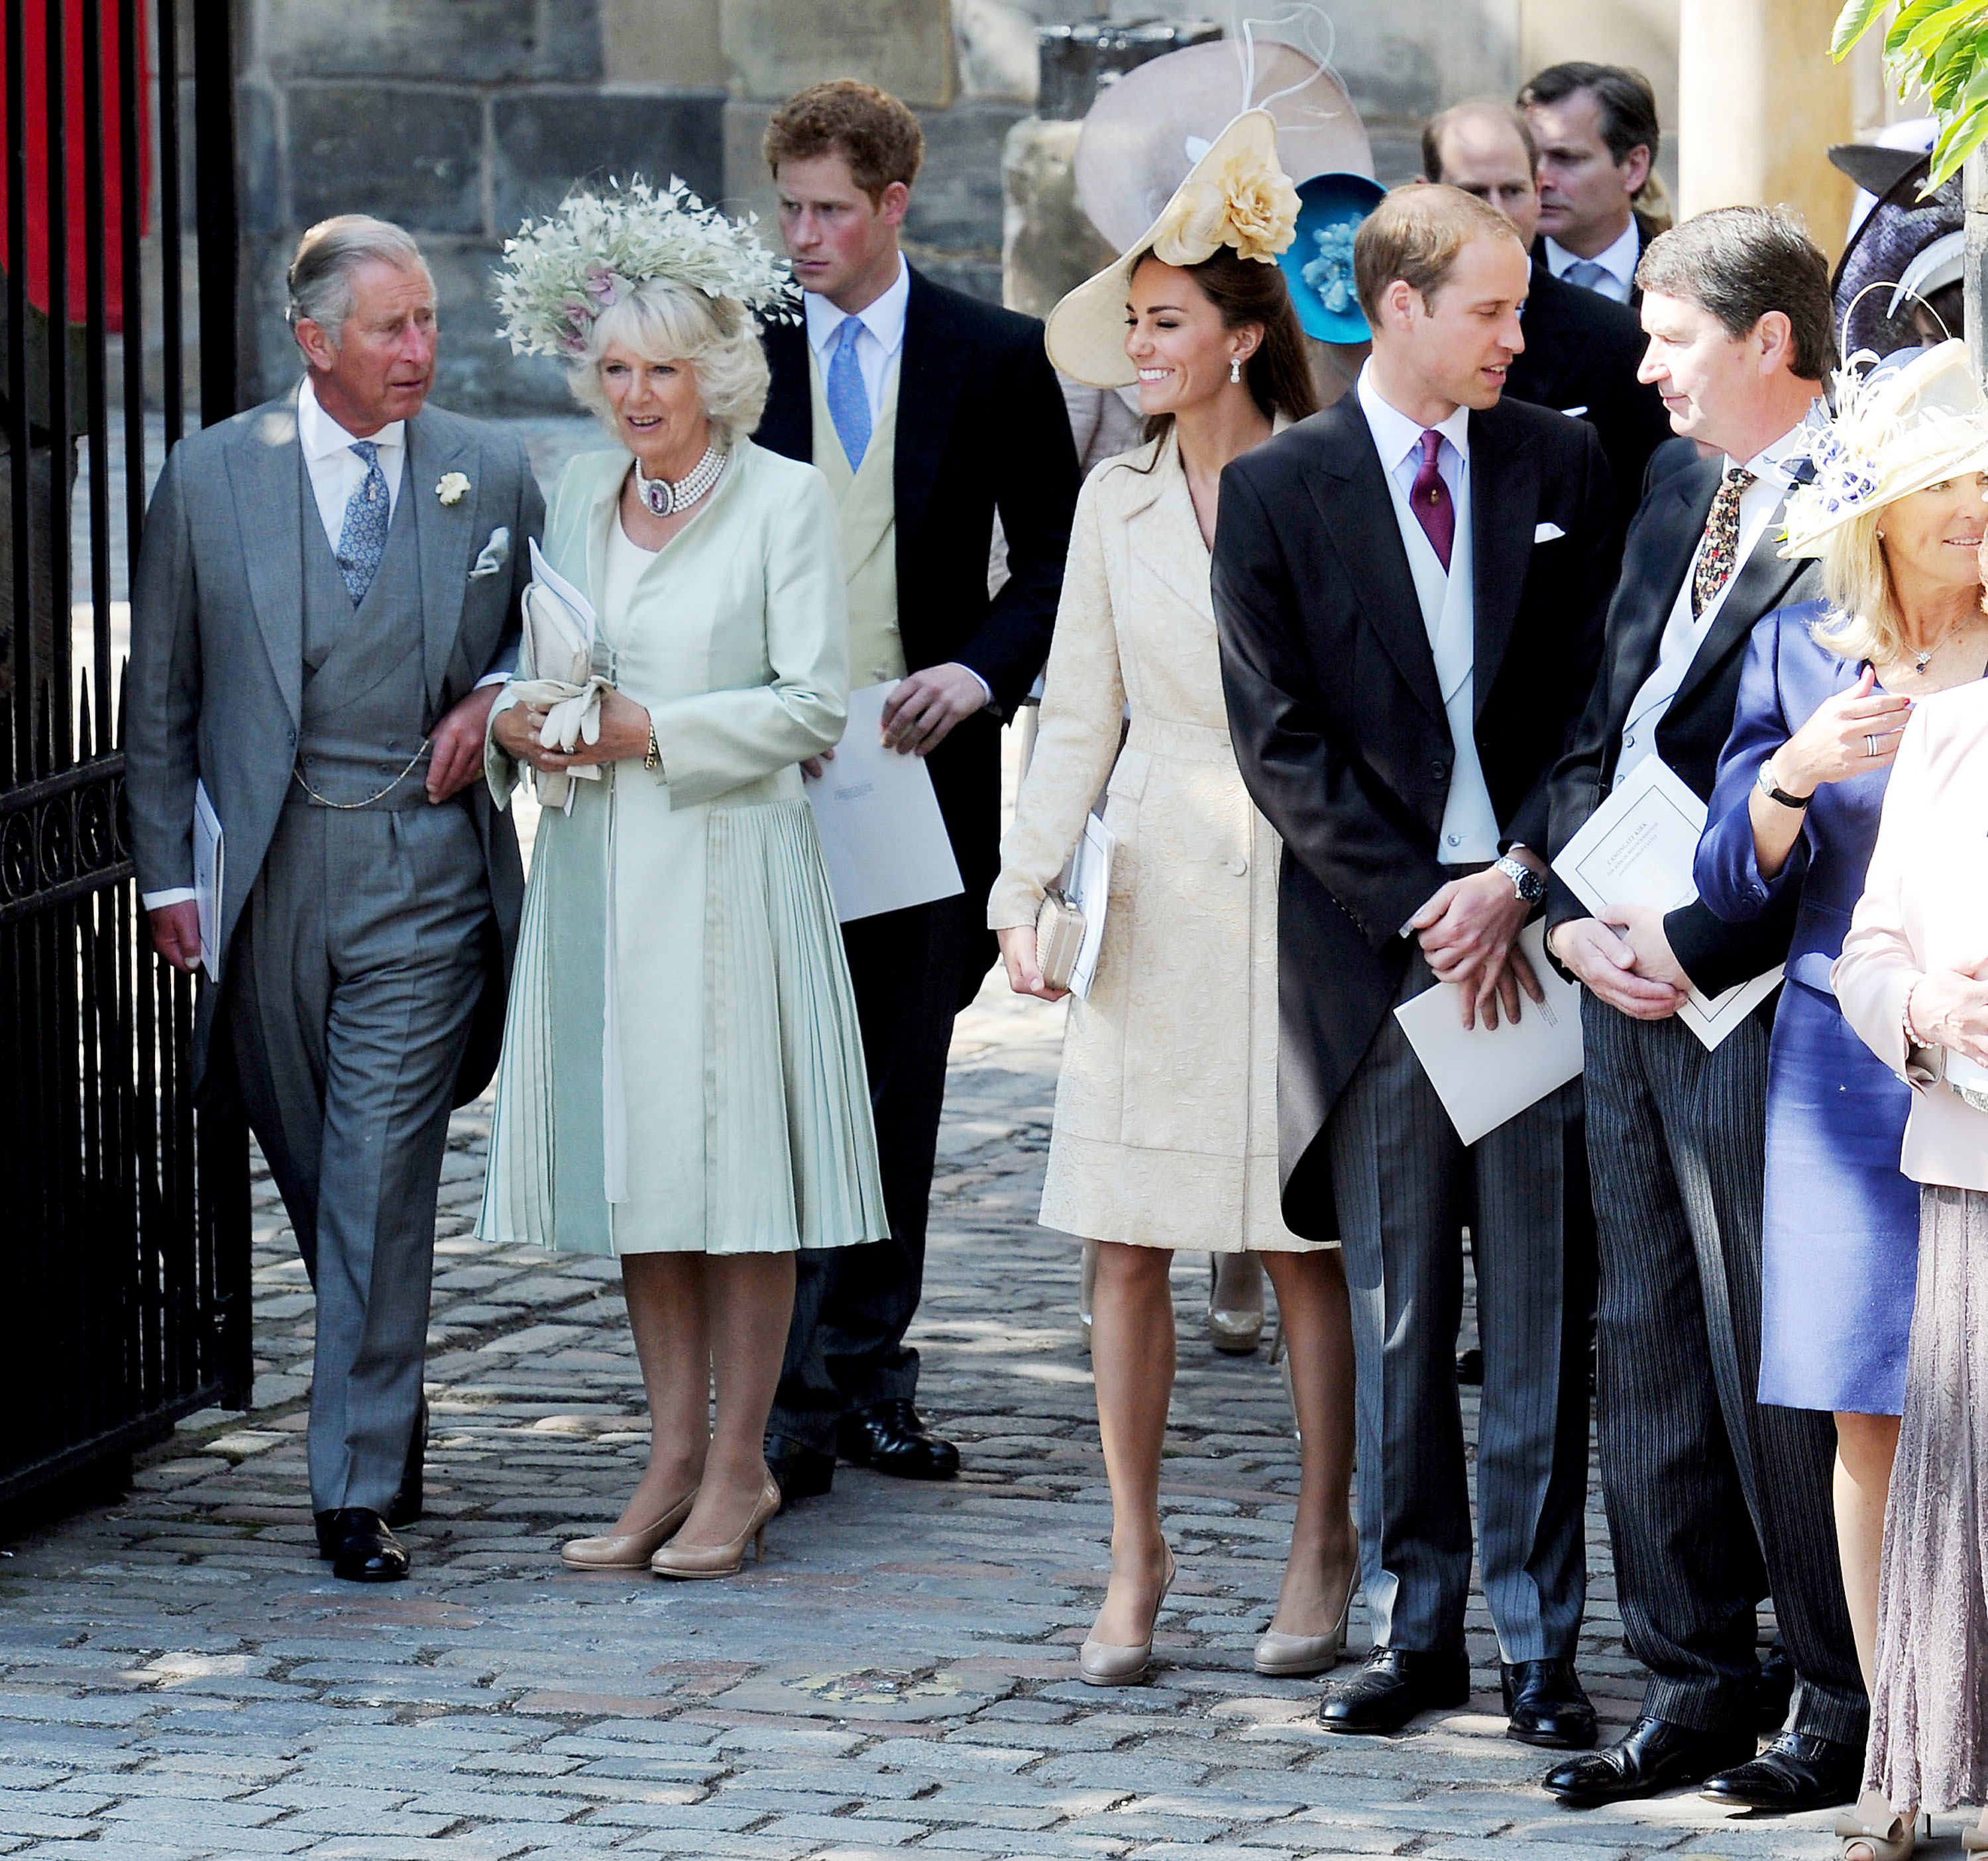 <p>More family! Prince Charles, Duchess Camilla, <a href="https://www.wonderwall.com/celebrity/profiles/overview/prince-harry-481.article">Prince Harry</a>, <a href="https://www.wonderwall.com/celebrity/profiles/overview/duchess-kate-1356.article">Duchess Kate</a>, <a href="https://www.wonderwall.com/celebrity/profiles/overview/prince-william-482.article">Prince William</a> and Vice Admiral Timothy Laurence attended the royal wedding of Zara Phillips and Mike Tindall at Canongate Kirk on the Royal Mile in Edinburgh, Scotland, on July 30, 2011.</p>